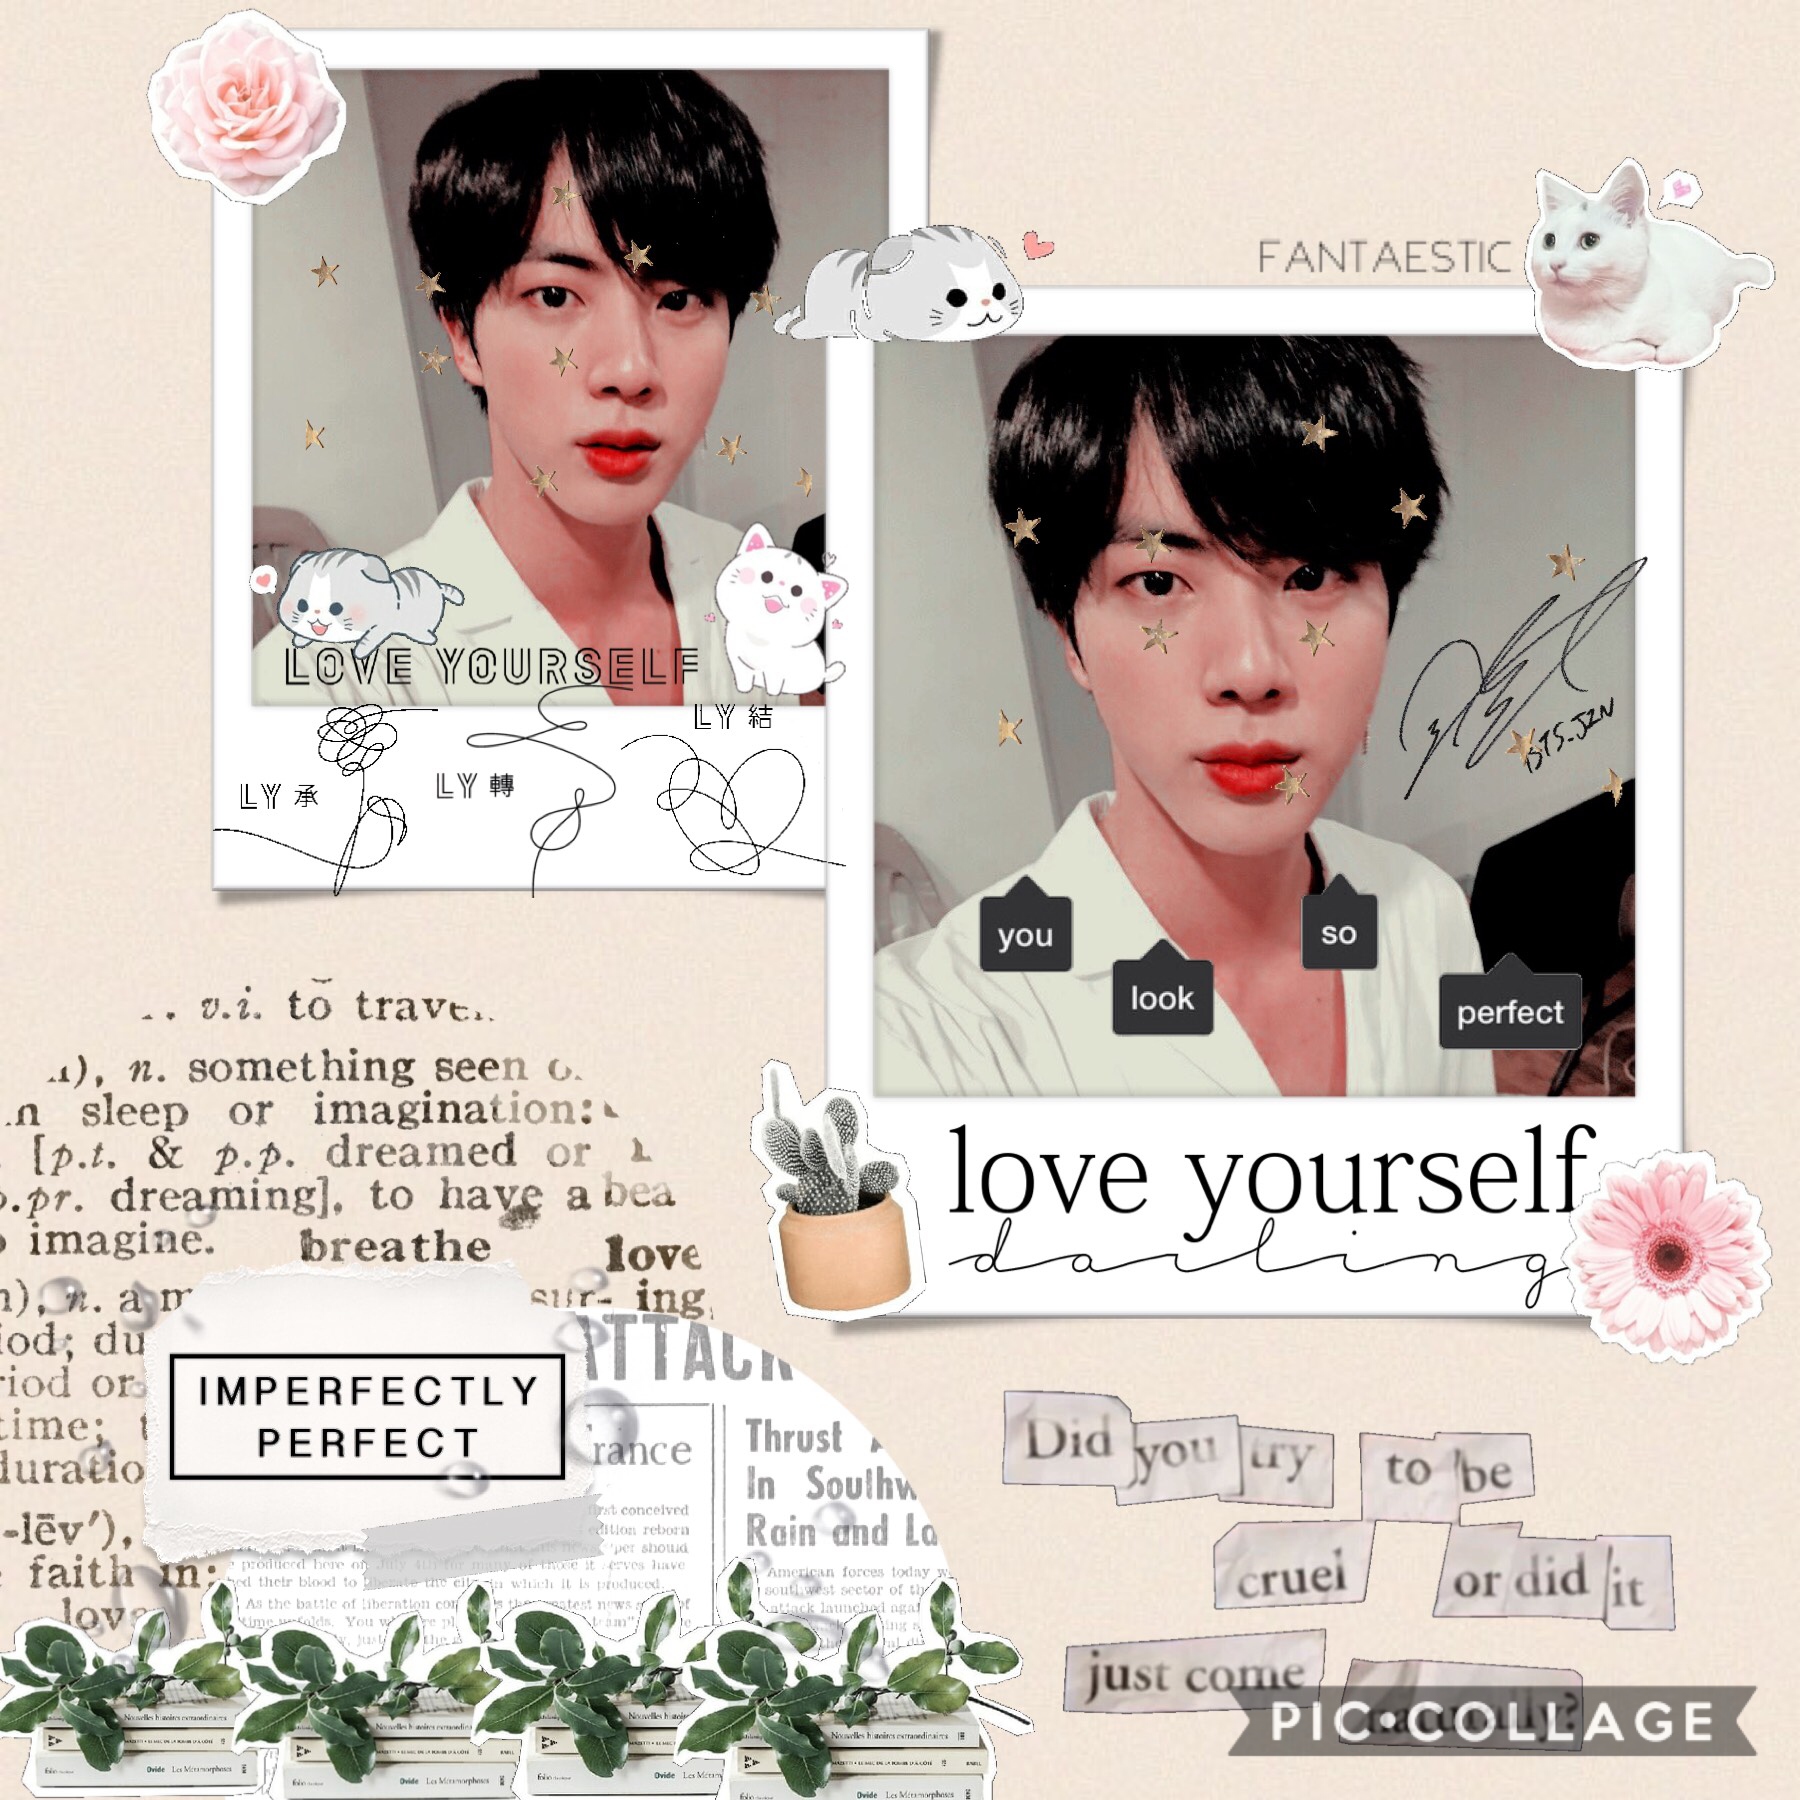 ★★★OPEN ME ★★★
did you guys see my new icon? thanks to @JeonJungkookieee for my icon! I really loved it! ❤️
QOTD: epiphany or awake?
AOTD: i love both 😫
rate this edit pls